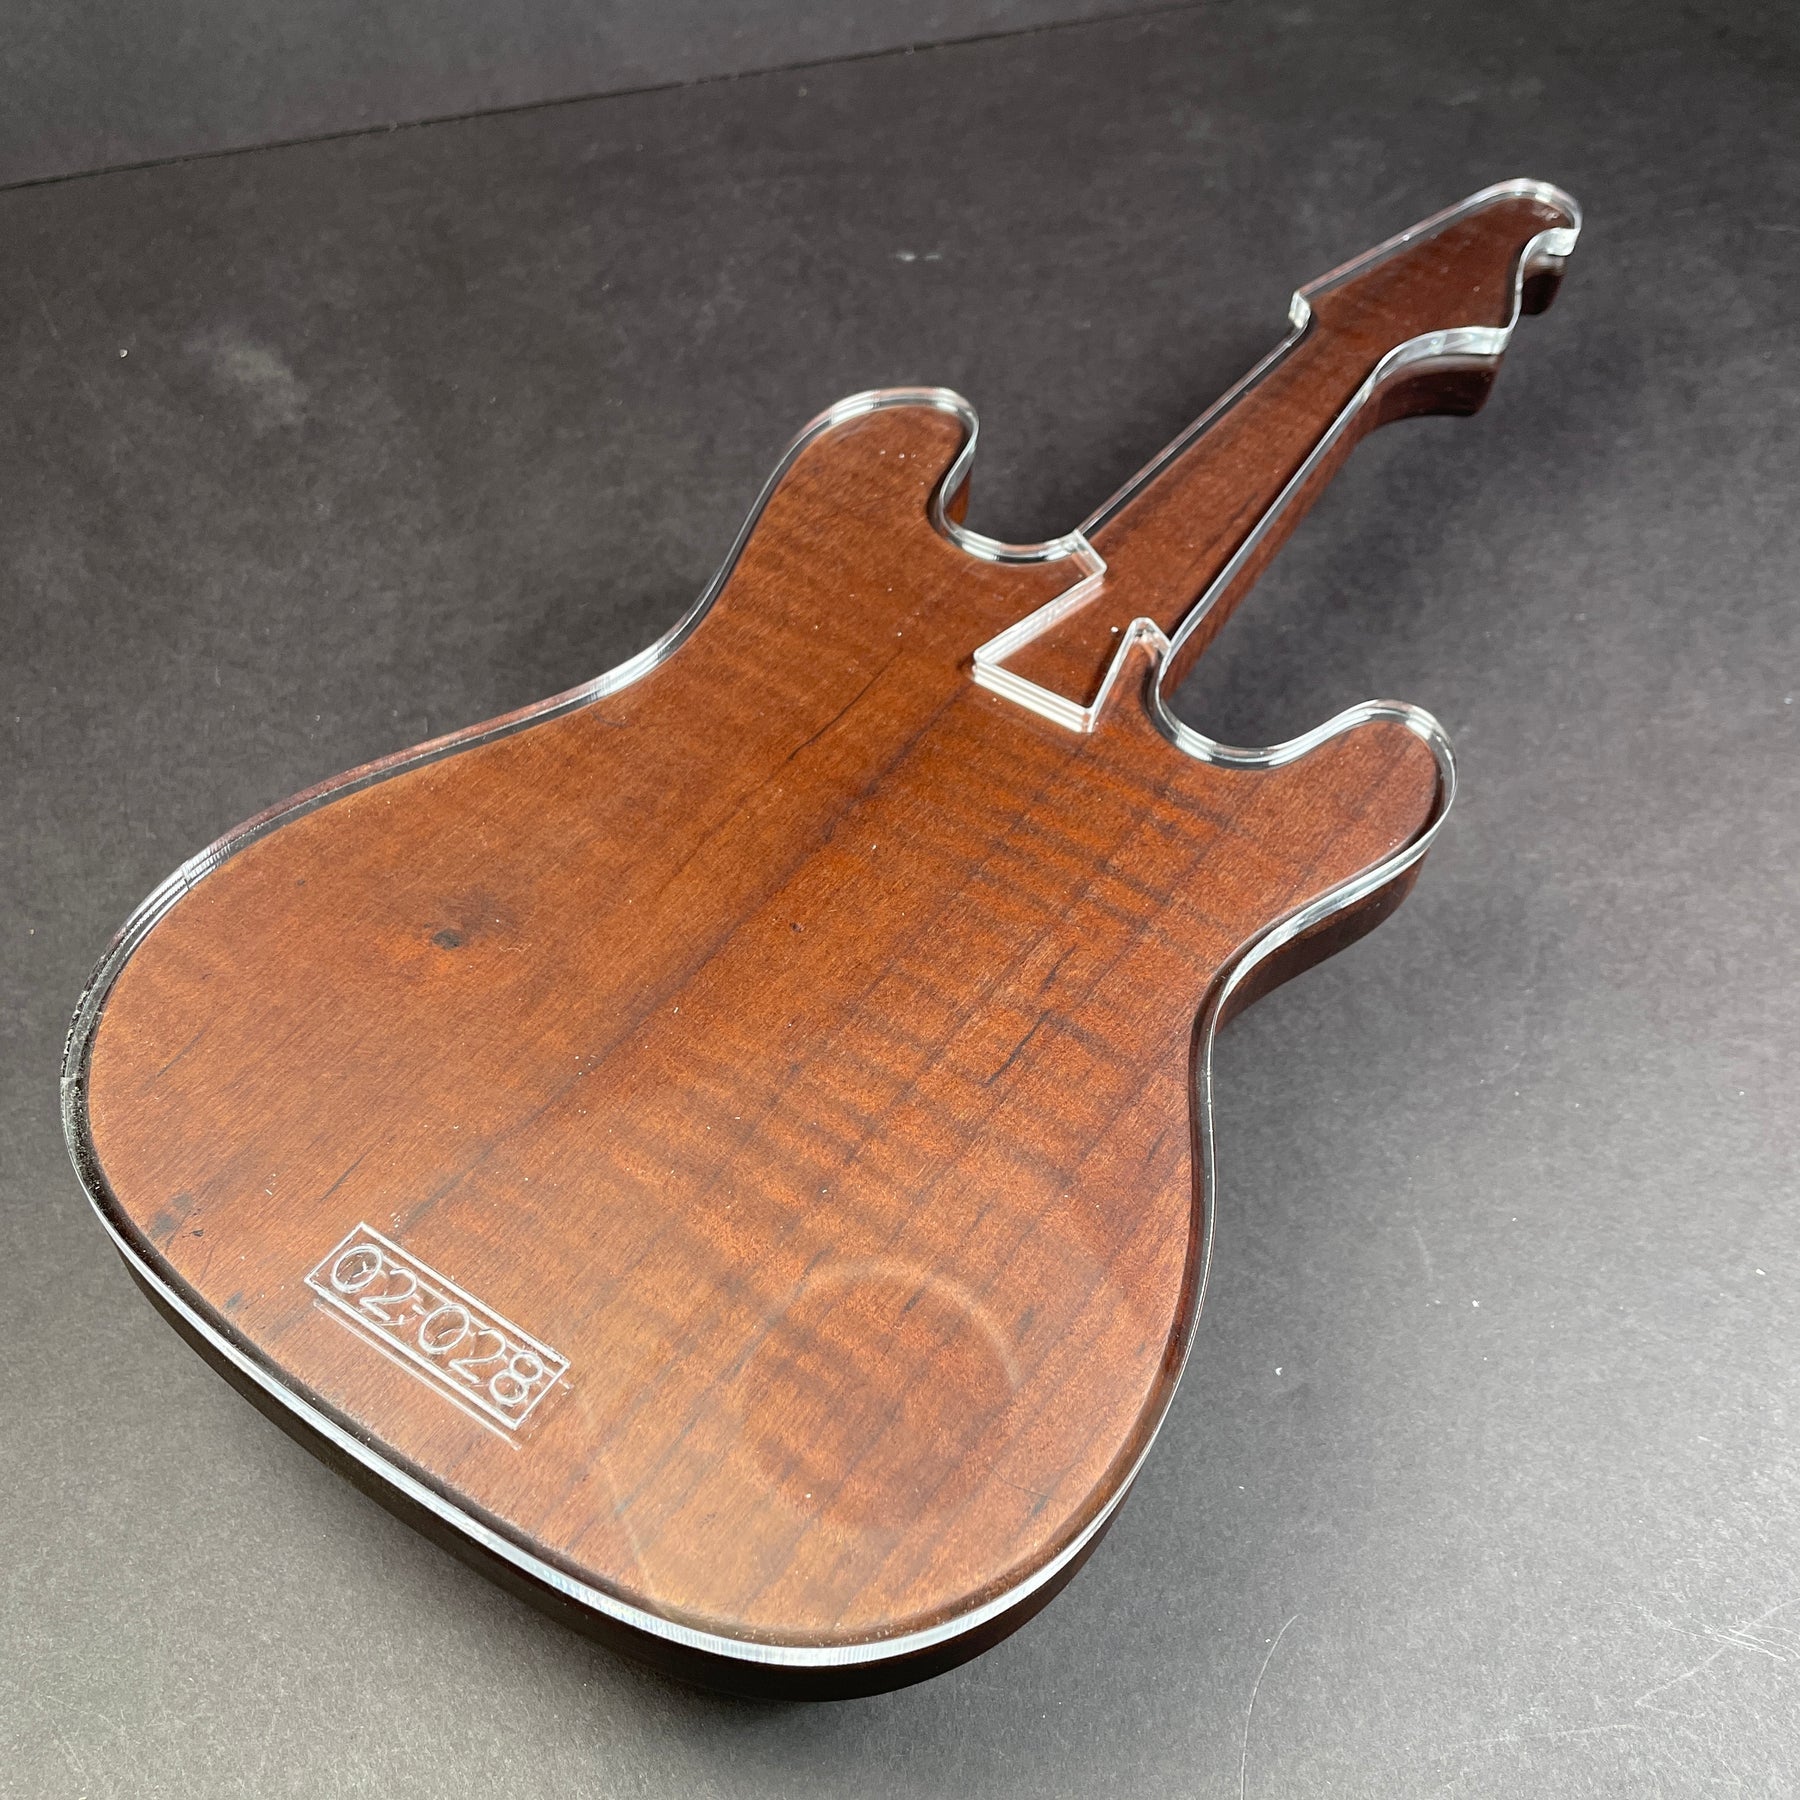 Guitar Serving Board Router Template